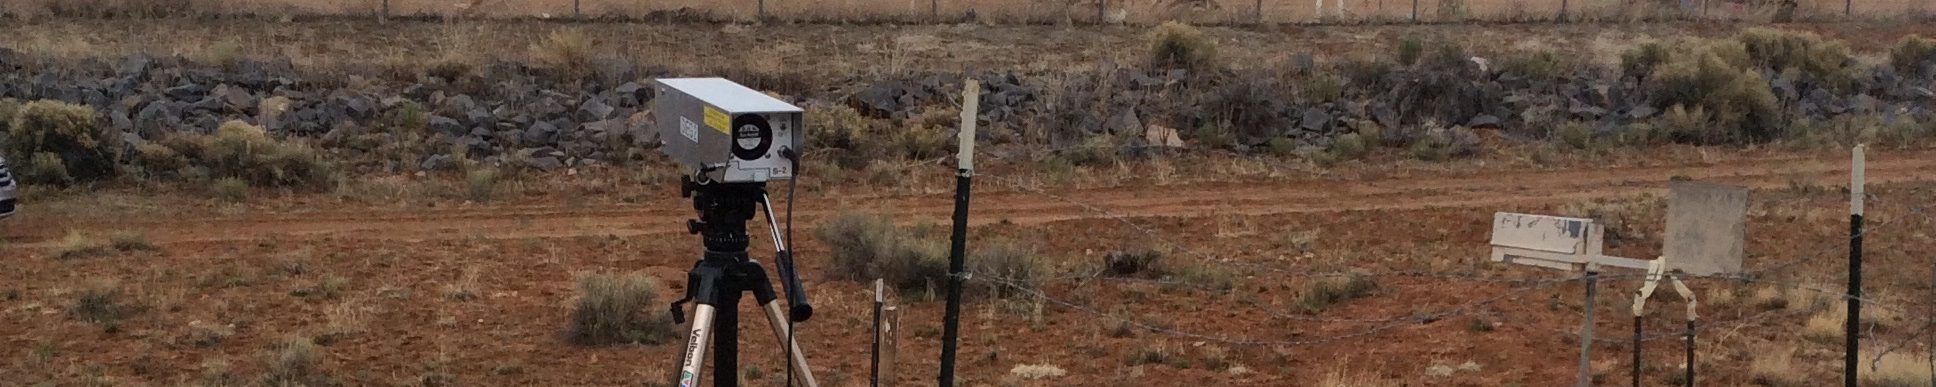  Active dust sampler sitting on top of tripod and attached to batteries. Head frame and fence of the Pinyon Plain Mine (formerly Canyon Mine) in the background. 